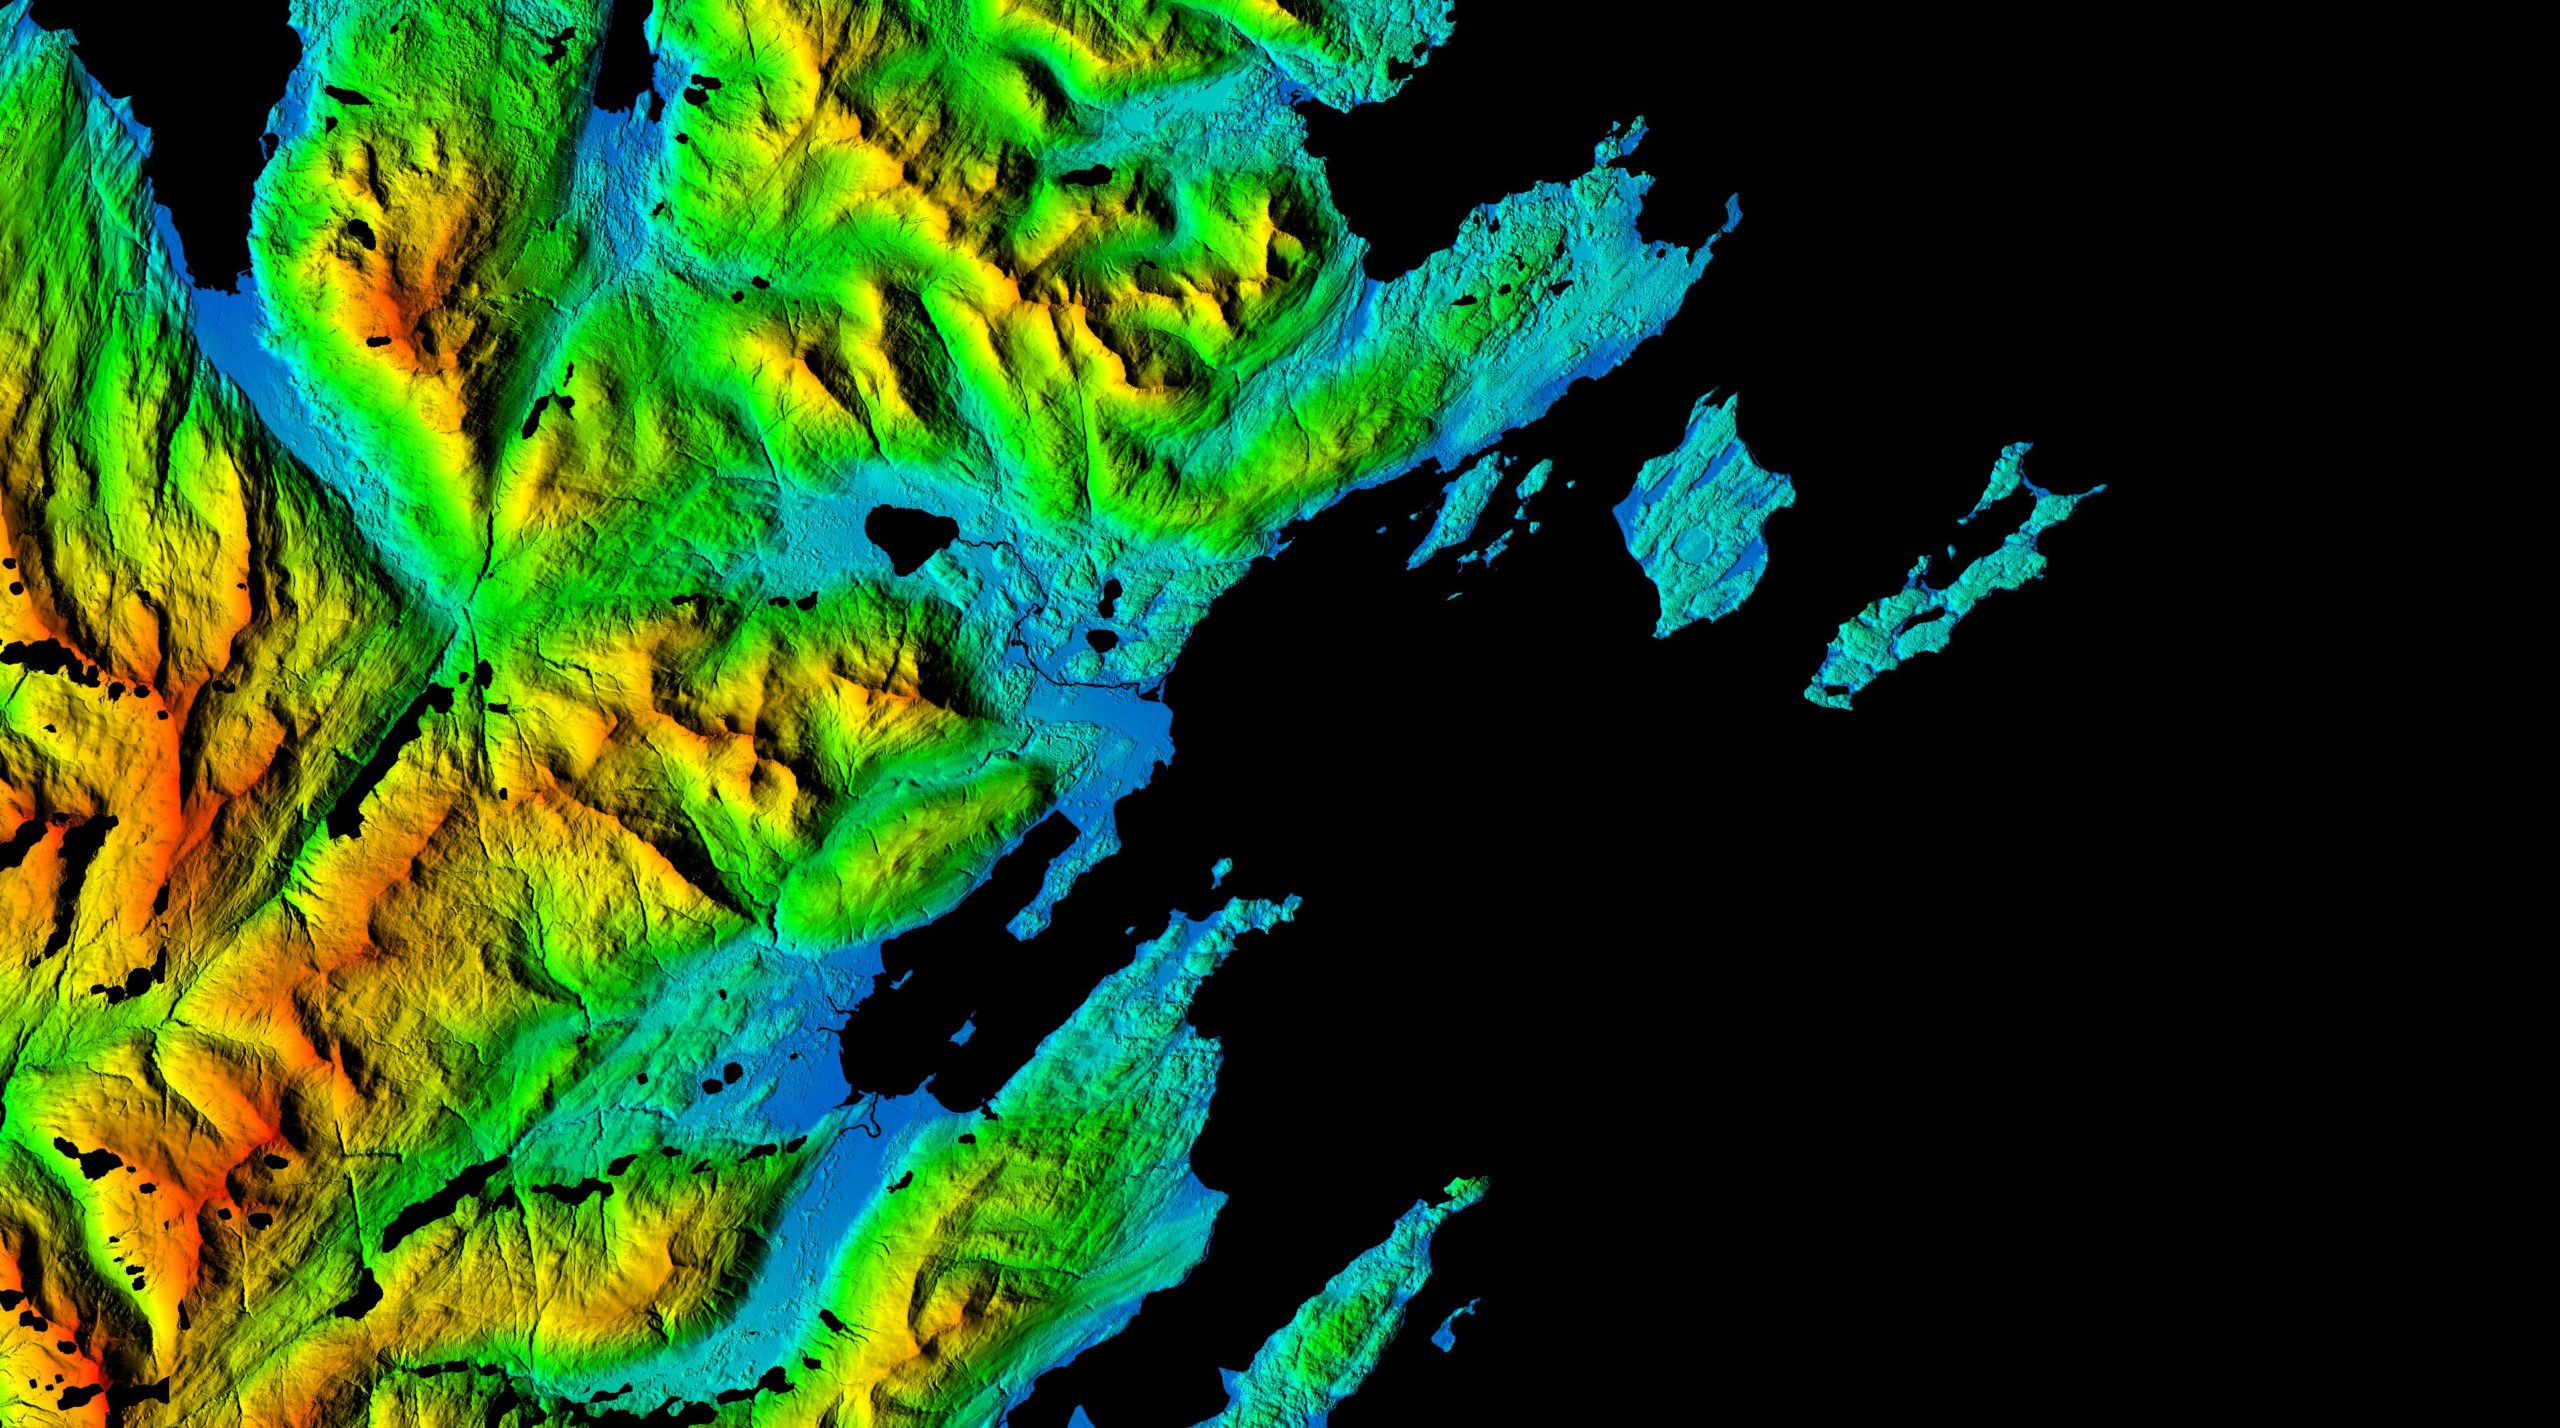 Enjoy A Gloriously Detailed Look At The Arctic Before It Melts Away